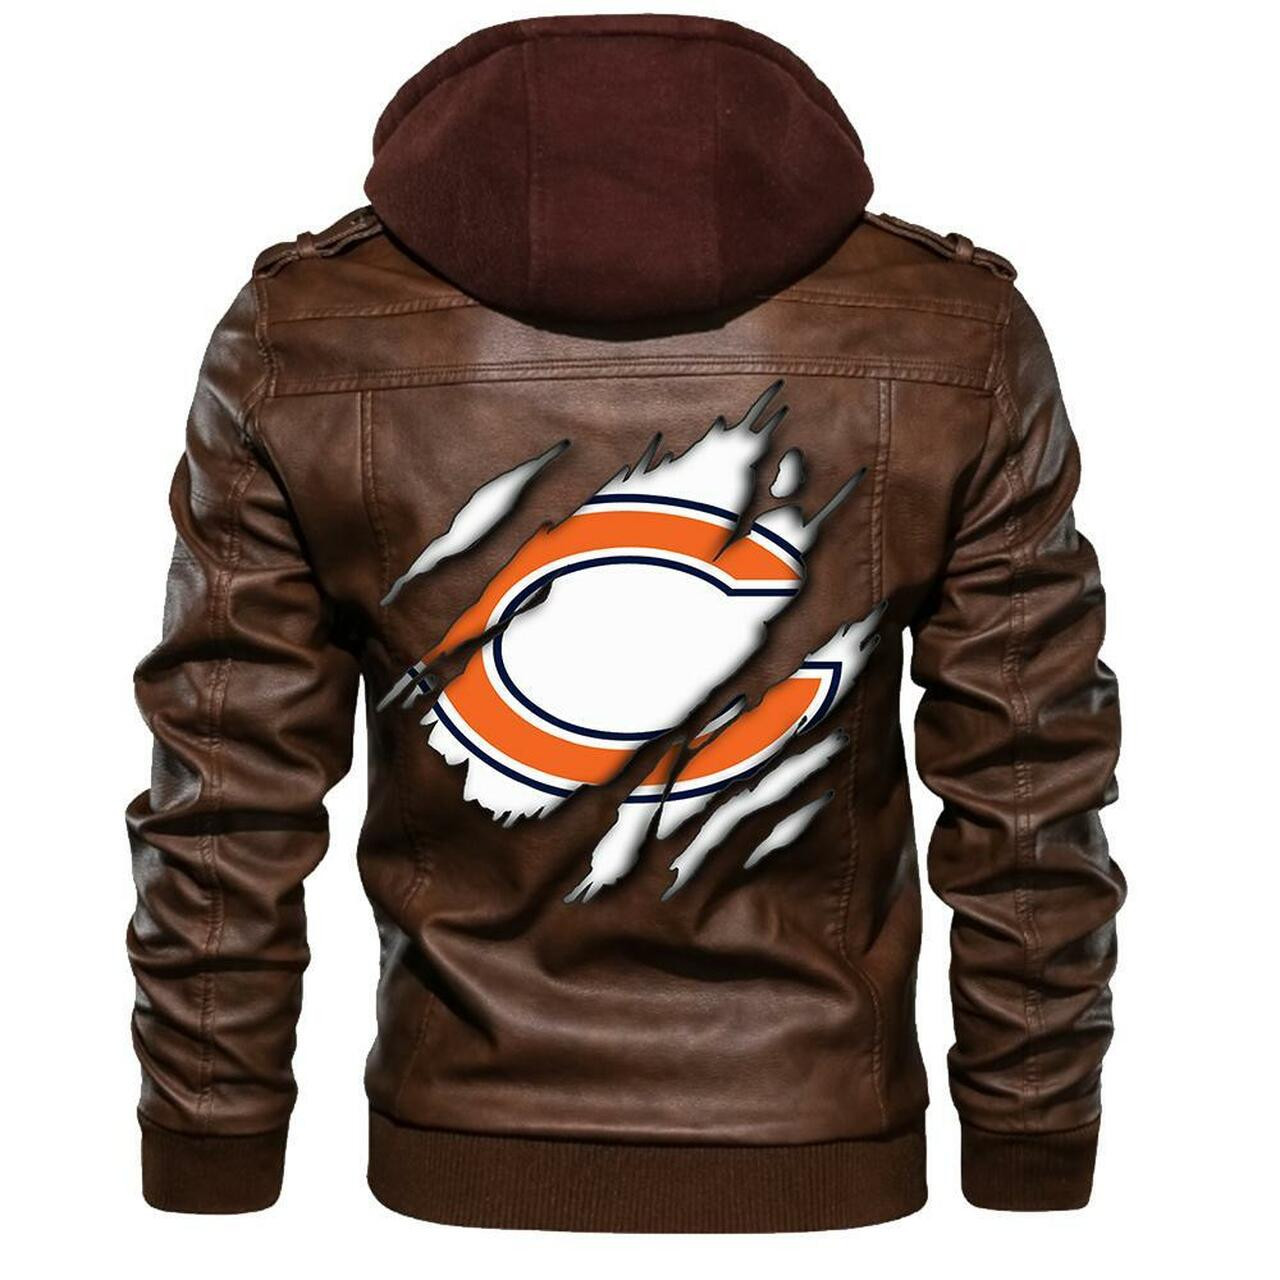 Are you looking for a great leather jacket? 226